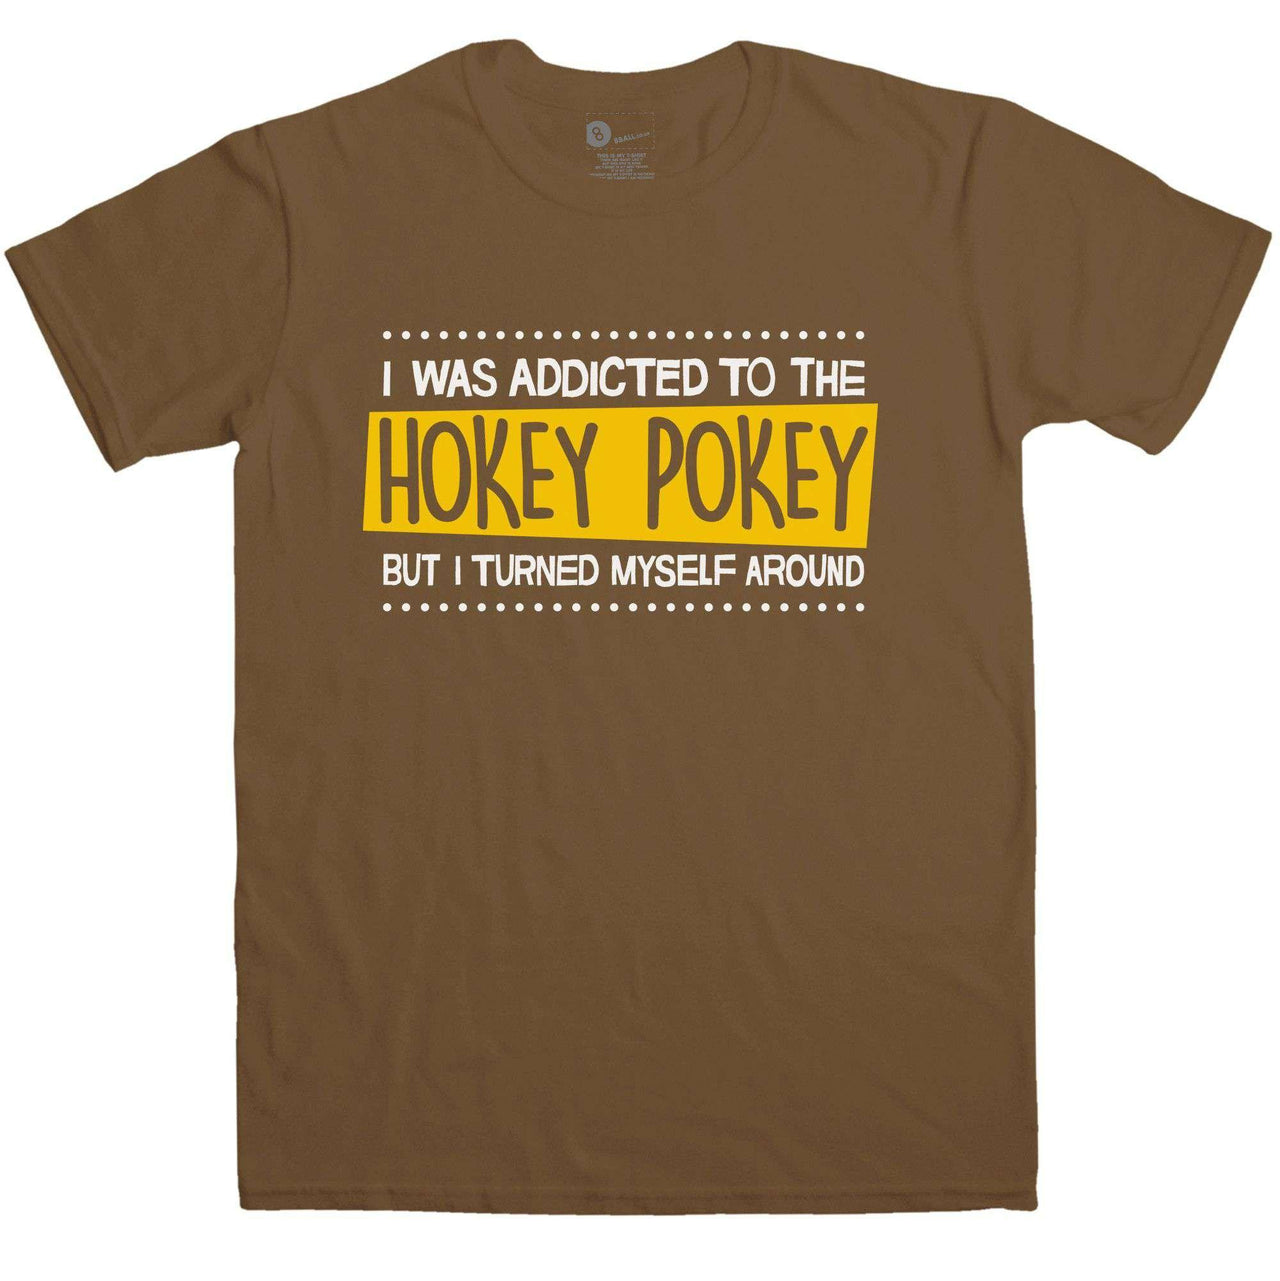 Addicted To The Hokey Pokey Funny Graphic T-Shirt For Men 8Ball